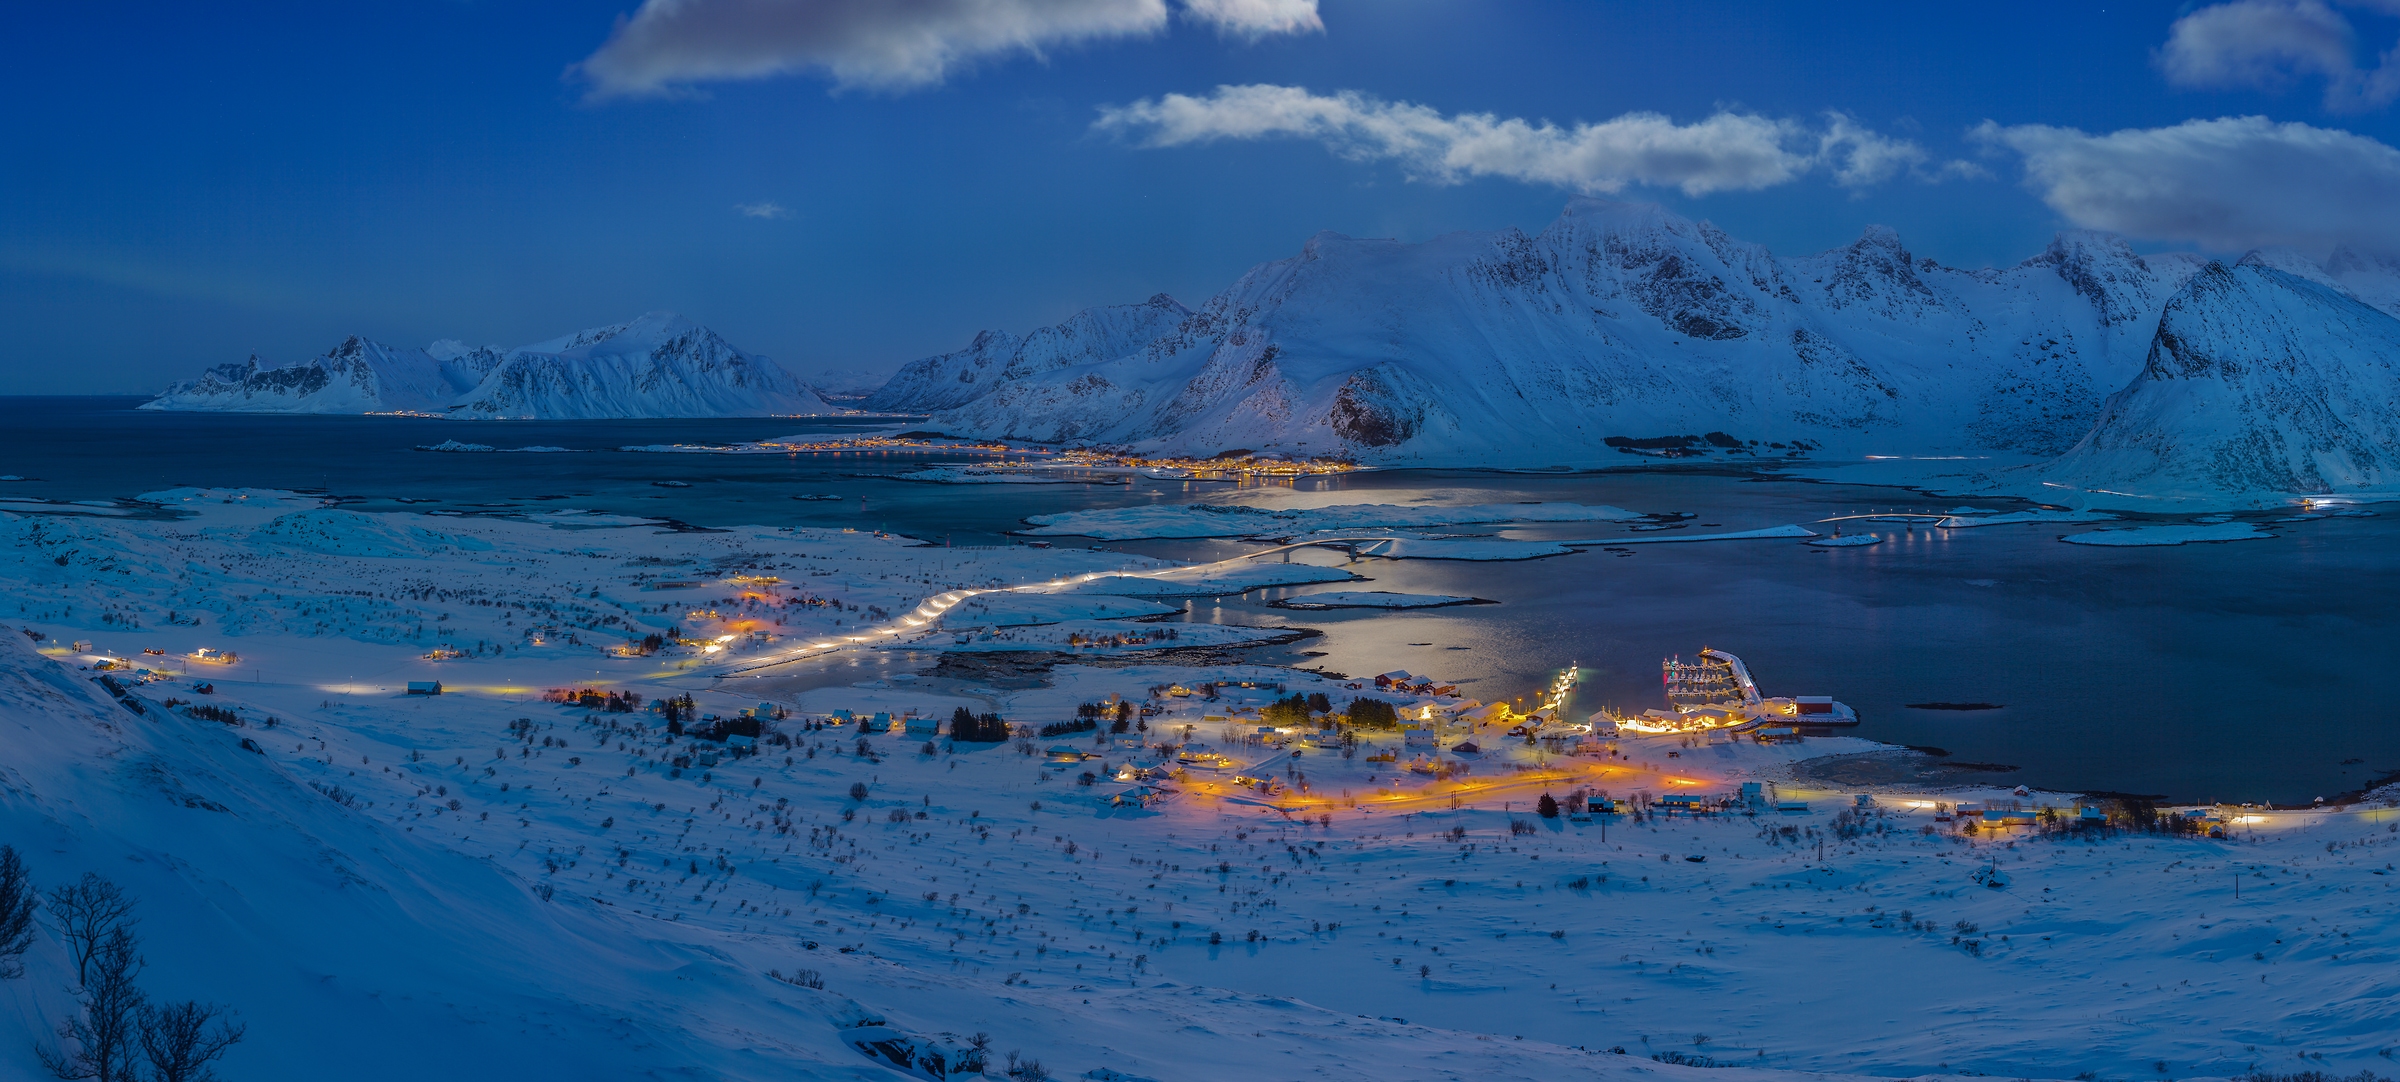 1,735 megapixels! A very high resolution, large-format VAST photo print of Lofoten, Norway at night with snow-covered mountains, illuminated homes, a bay, and the ocean; landscape photograph created by Martin Kulhavy in Fredvang, Lofoten, Norway.